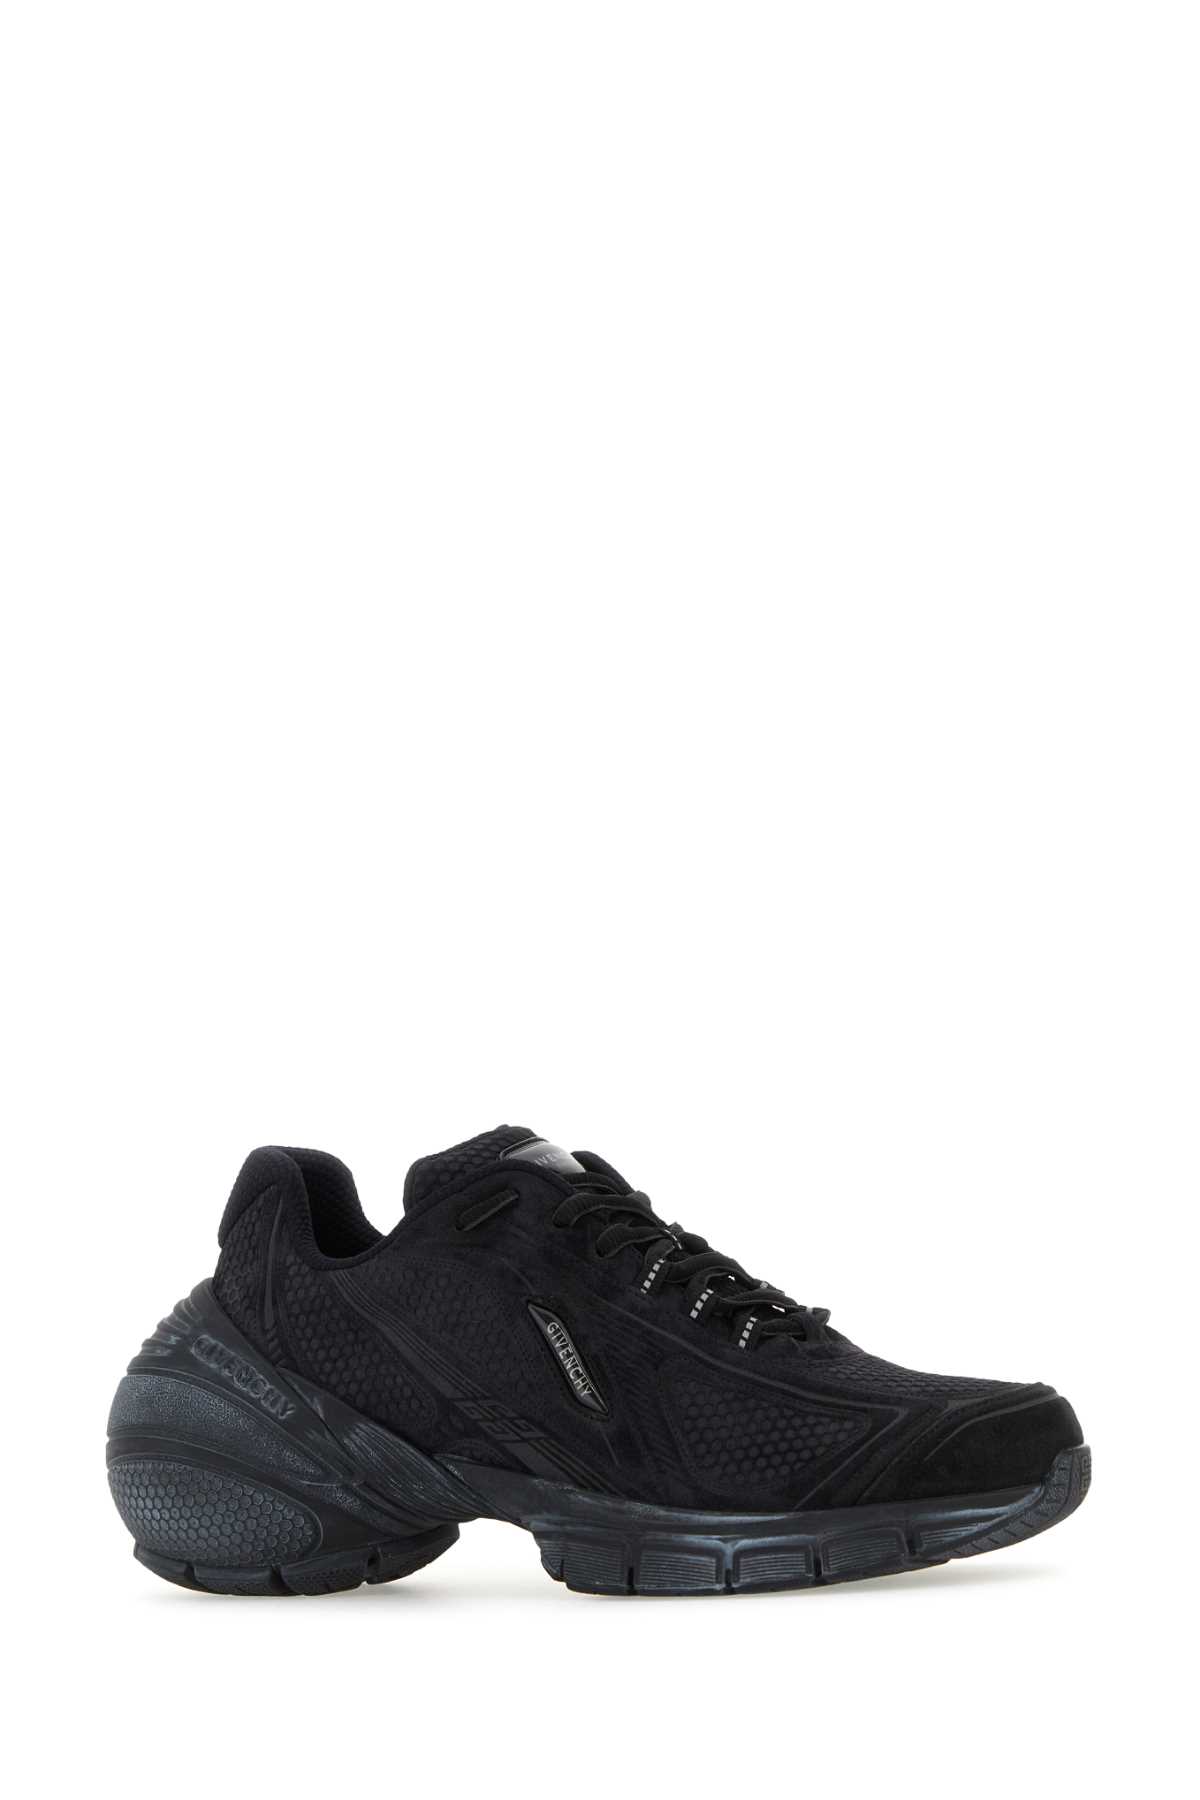 Shop Givenchy Black Leather Tk-mx Runner Sneakers